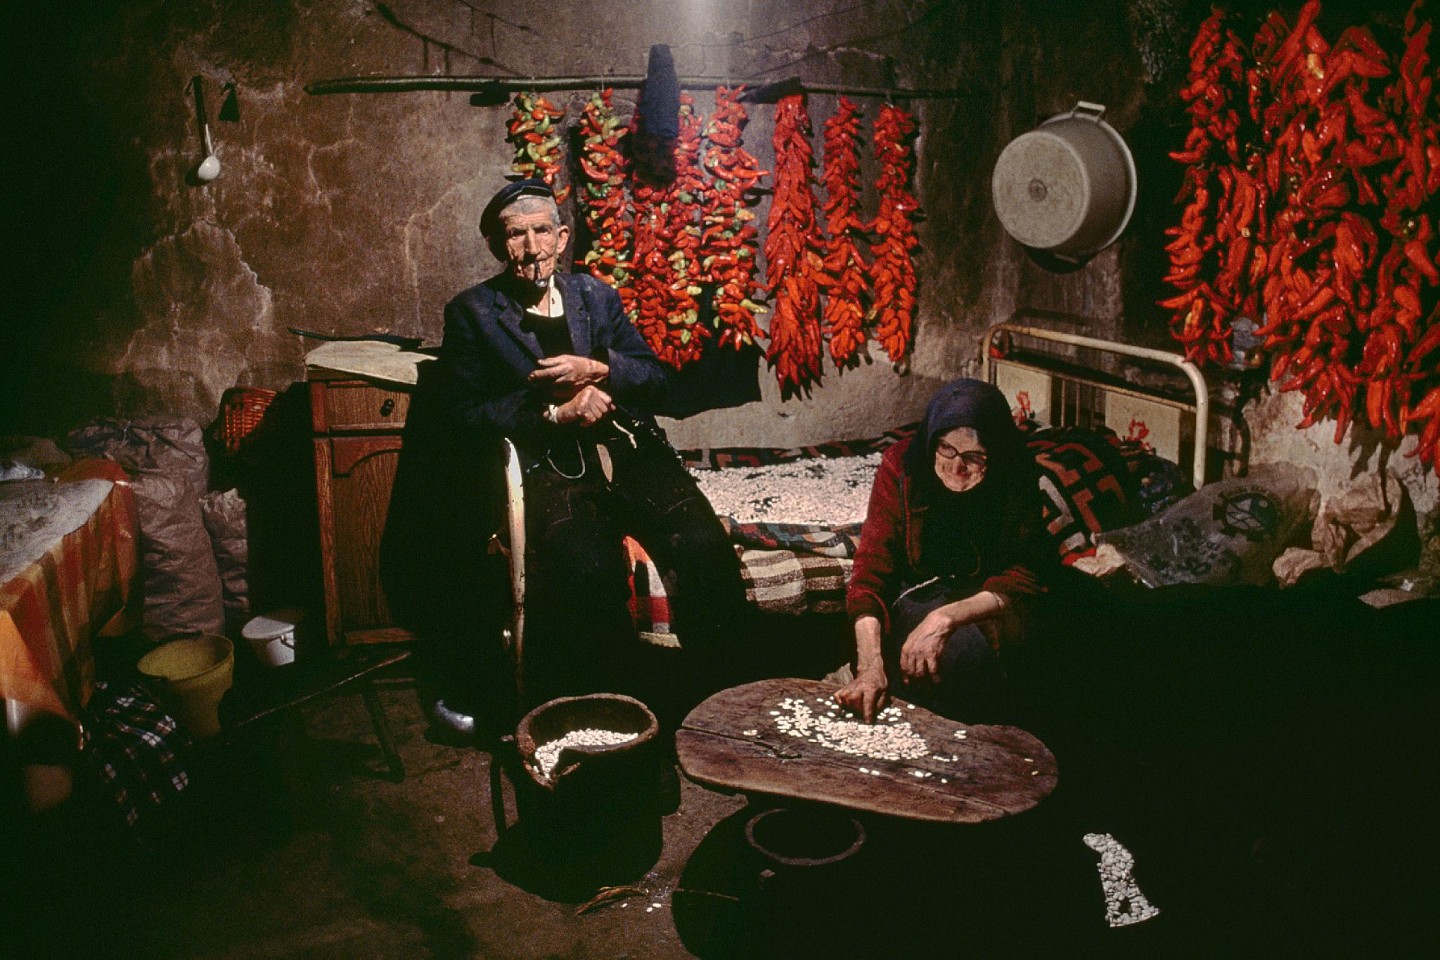 Steve McCurry, Couple Prepares Food, 1989
FujiFlex Crystal Archive Print
Price/Size on request